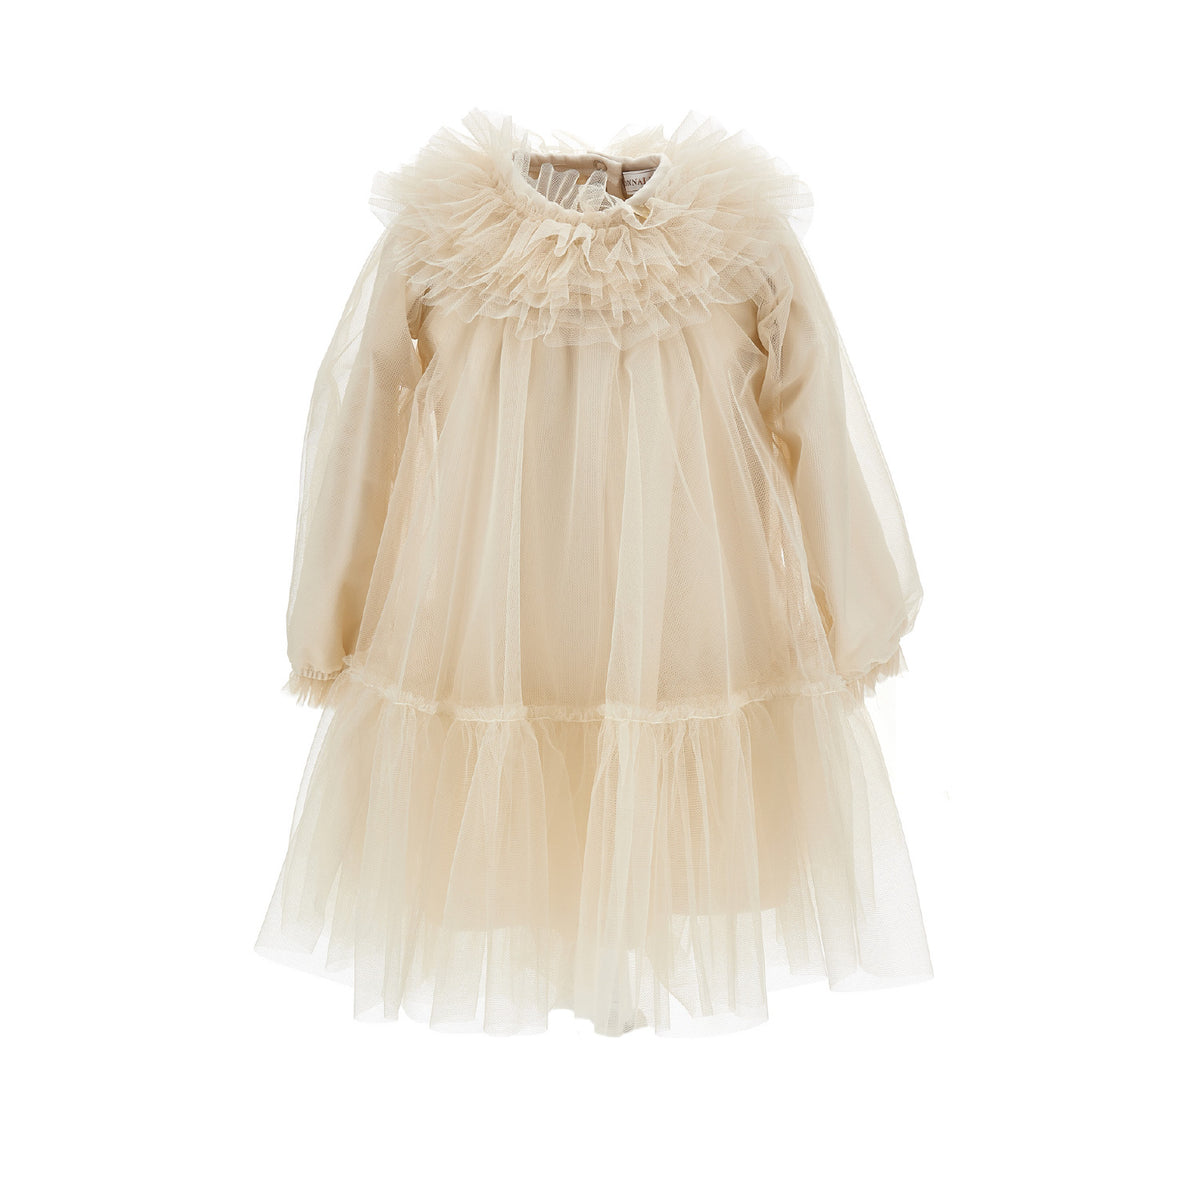 Slik-touch tulle dress with trim